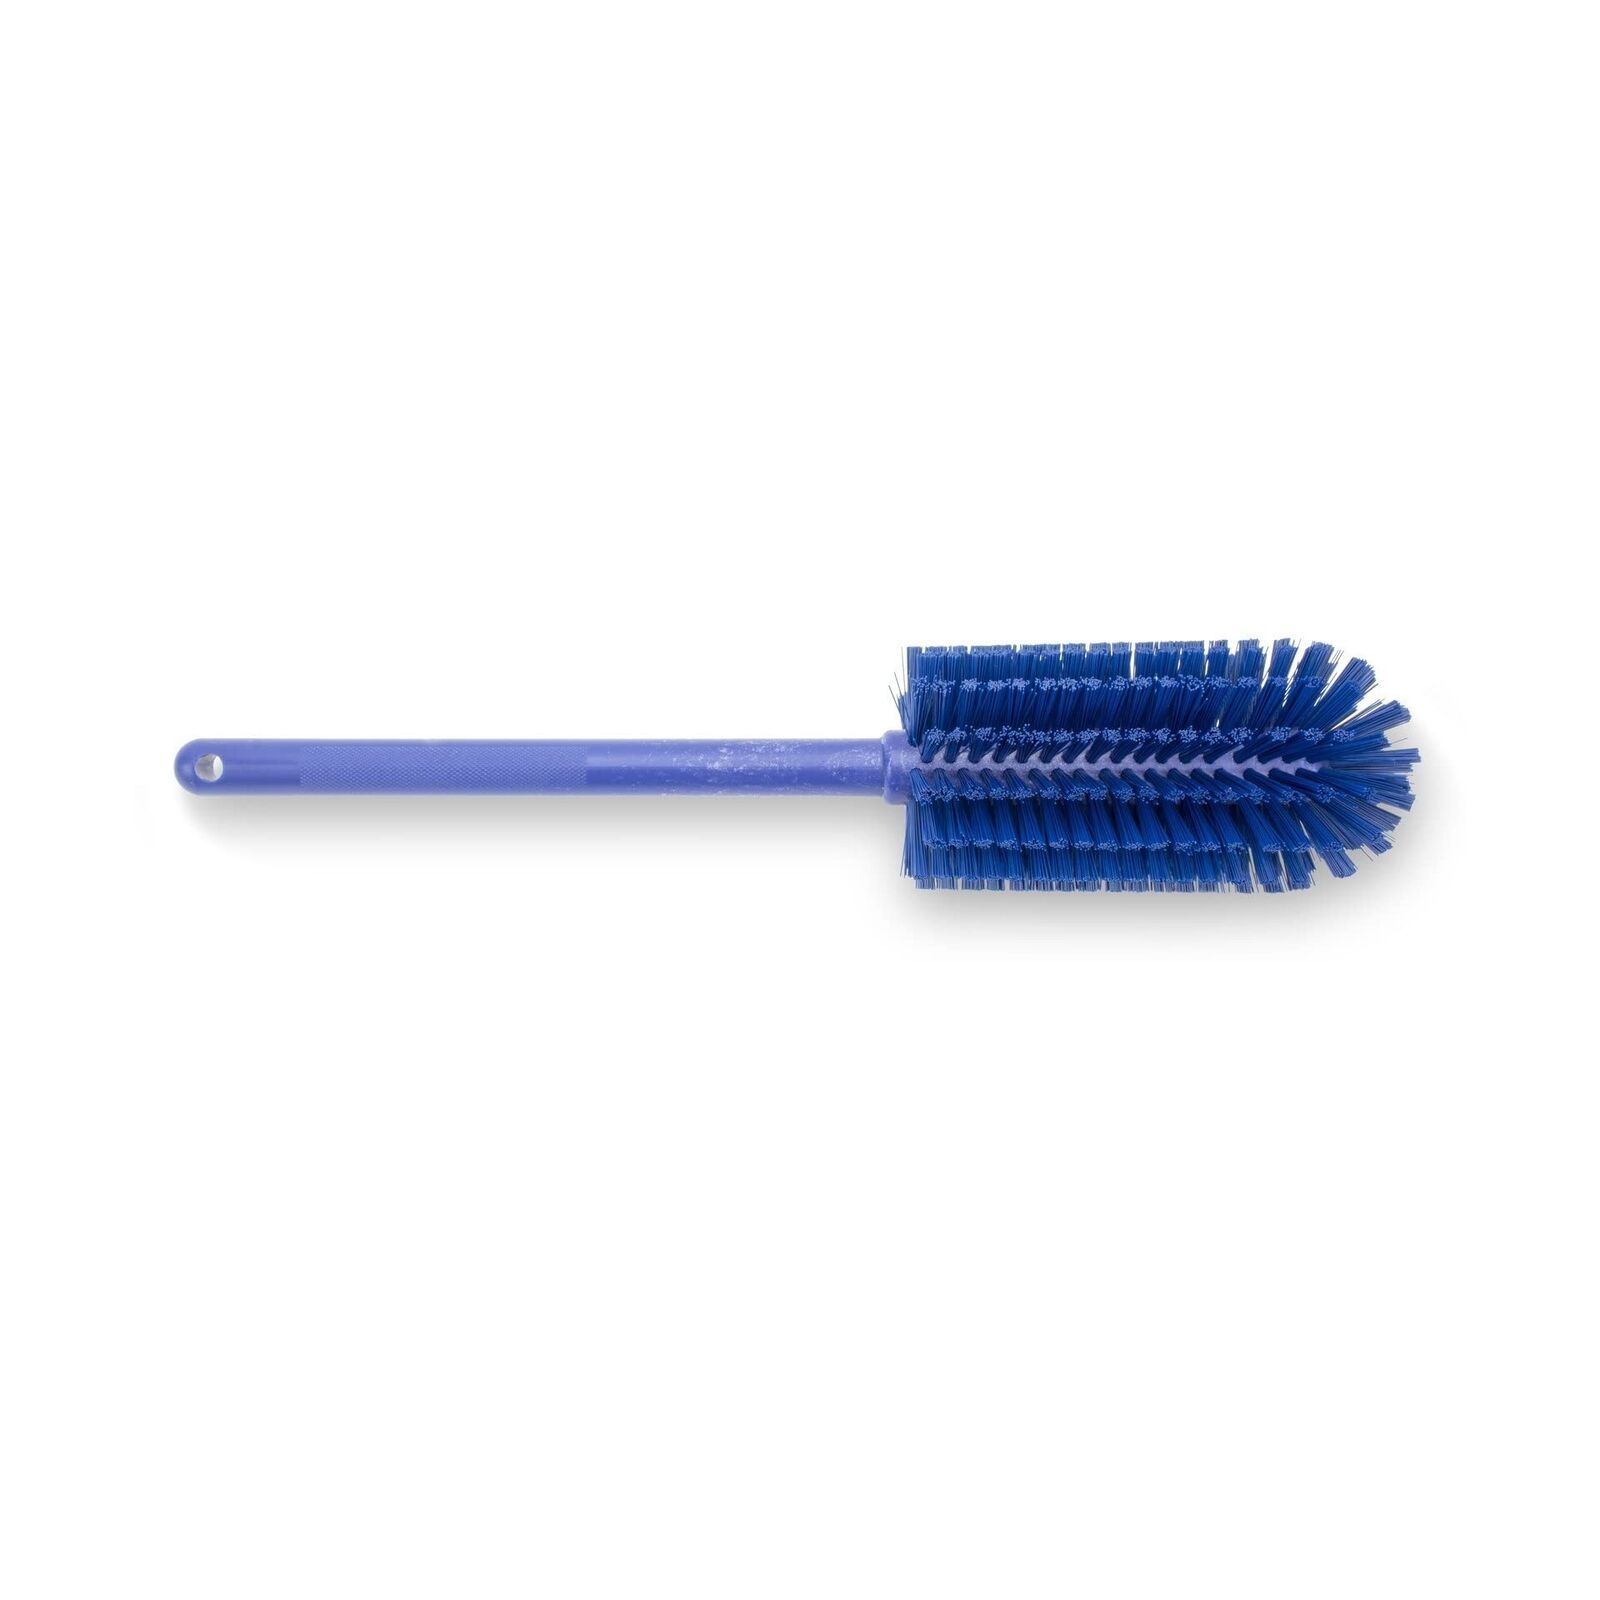 SPARTA Large Water Bottle Brush Ideal for Wide-Mouth Jars, Bottles and Tumble...